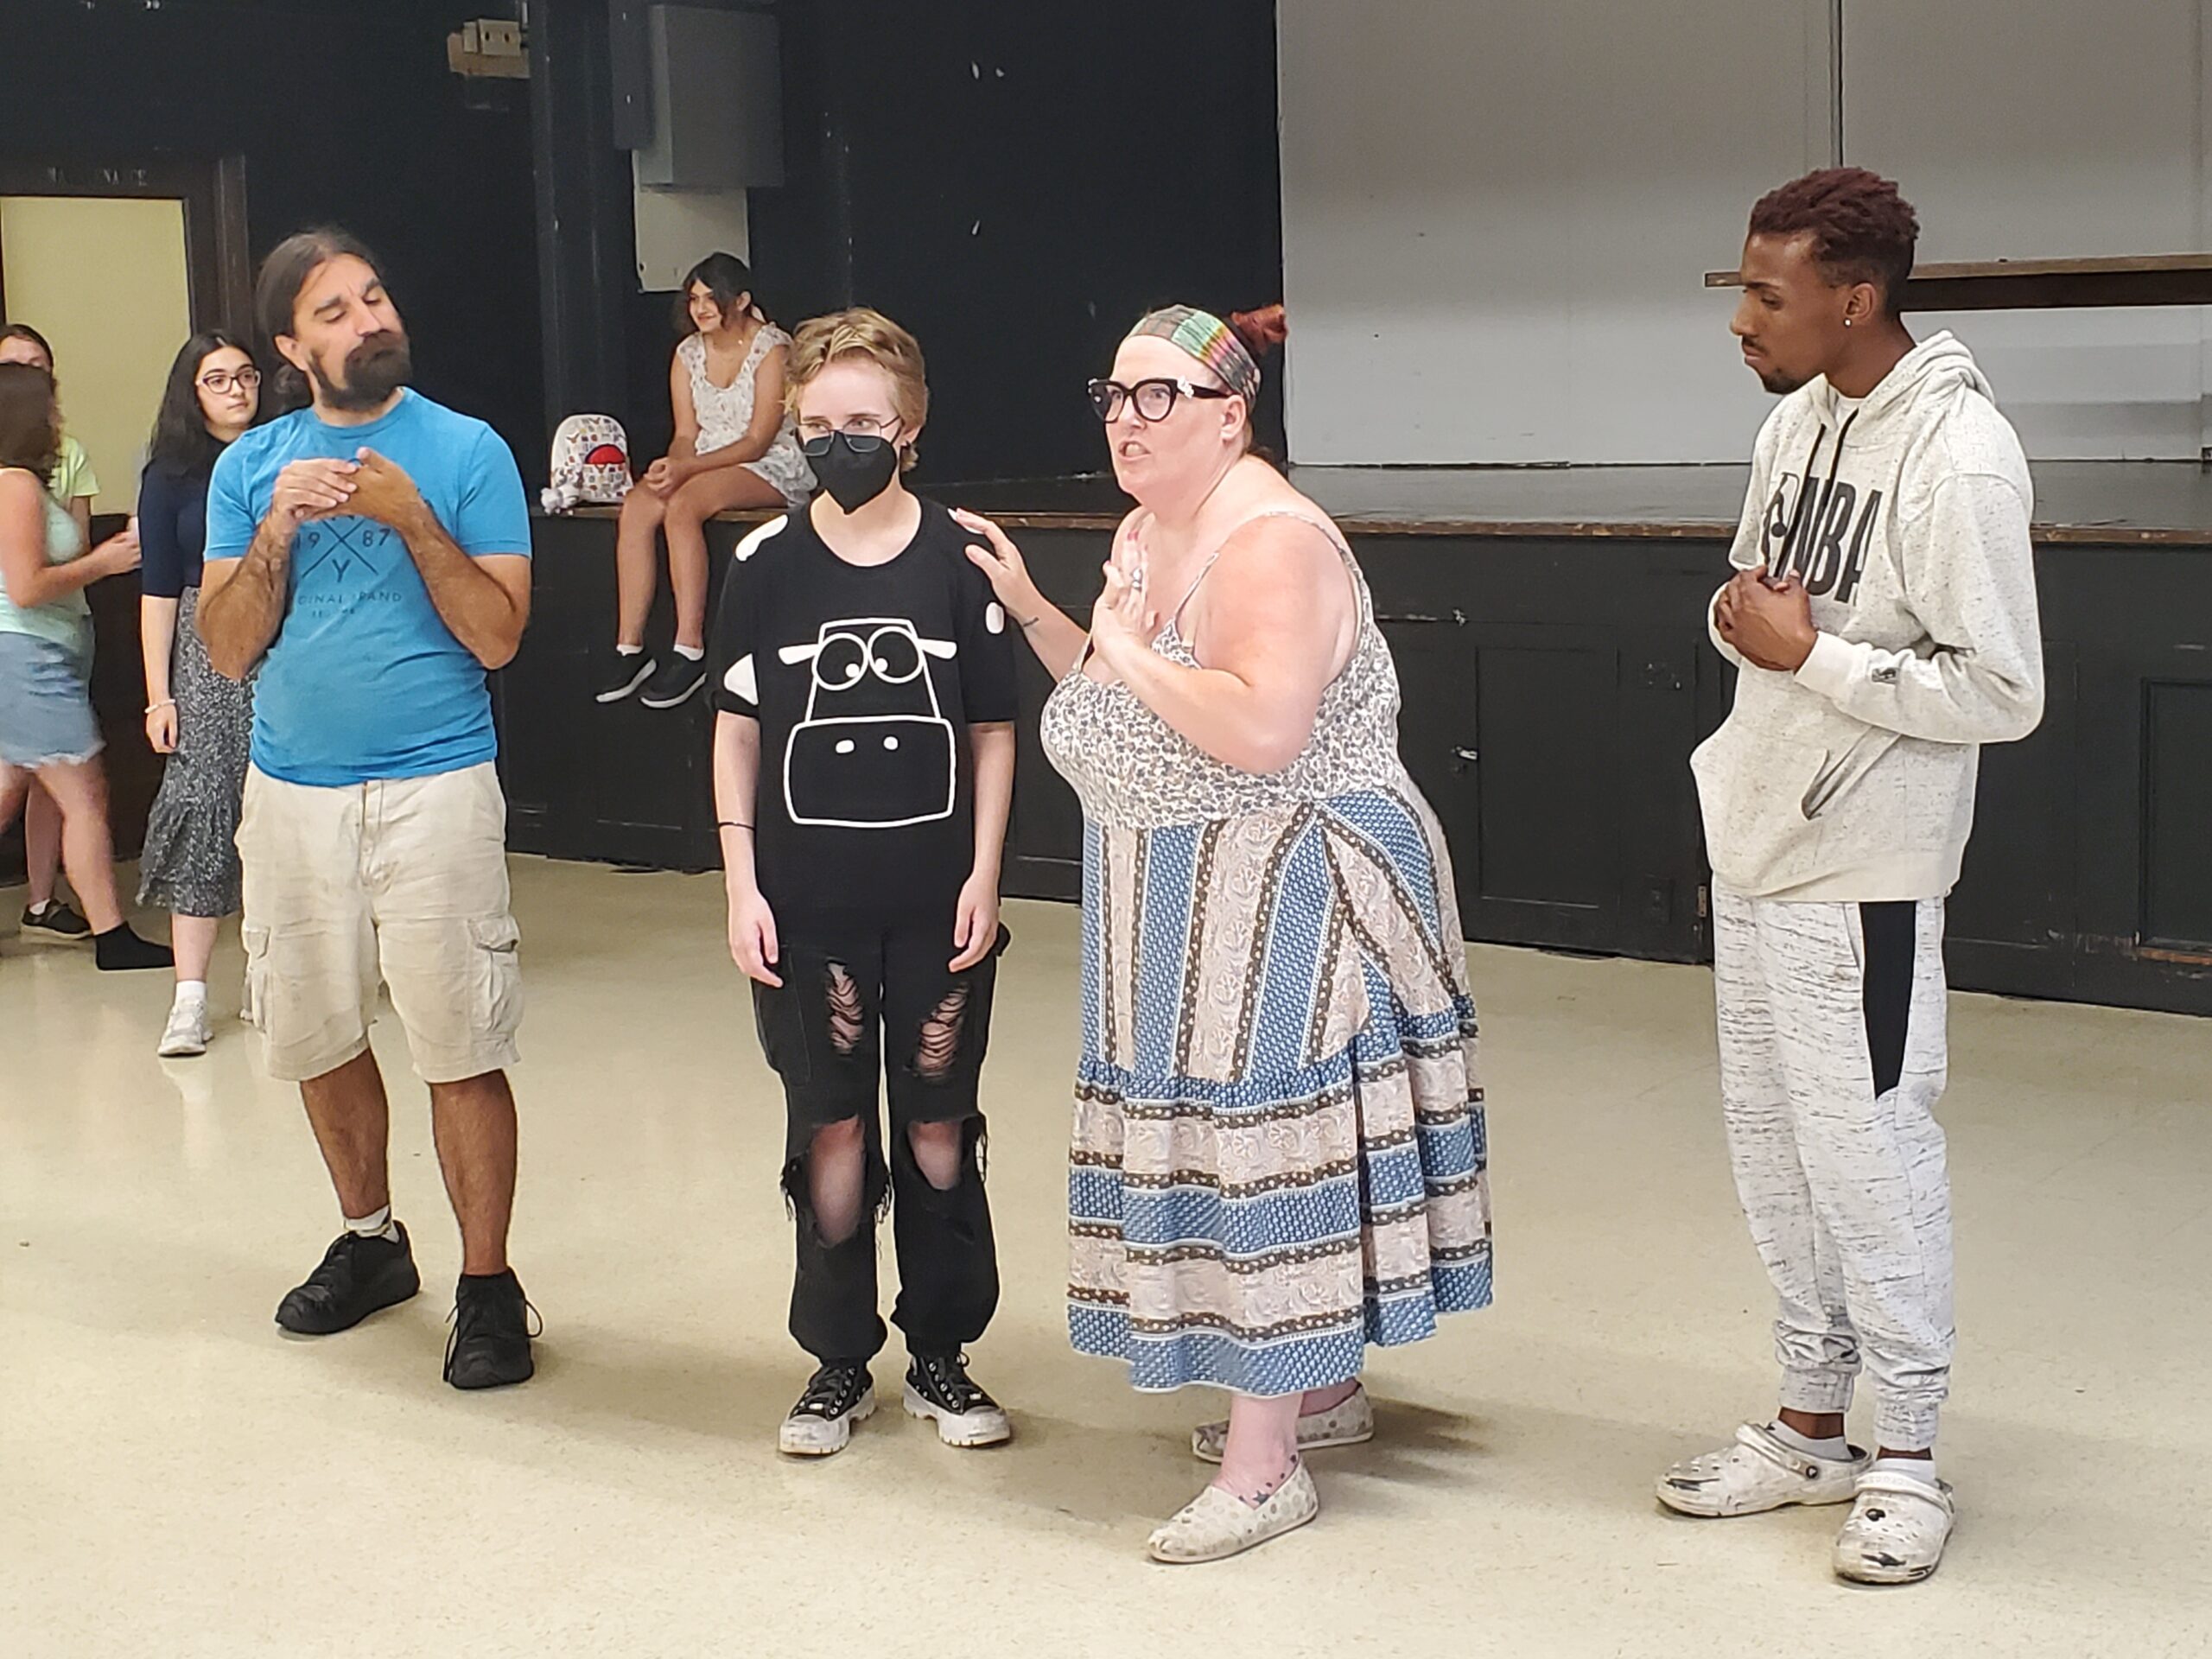 Four individuals stand in front of a stage, looking concerned. They are rehearsing Shakespeare's tragedy "Titus Andronicus."